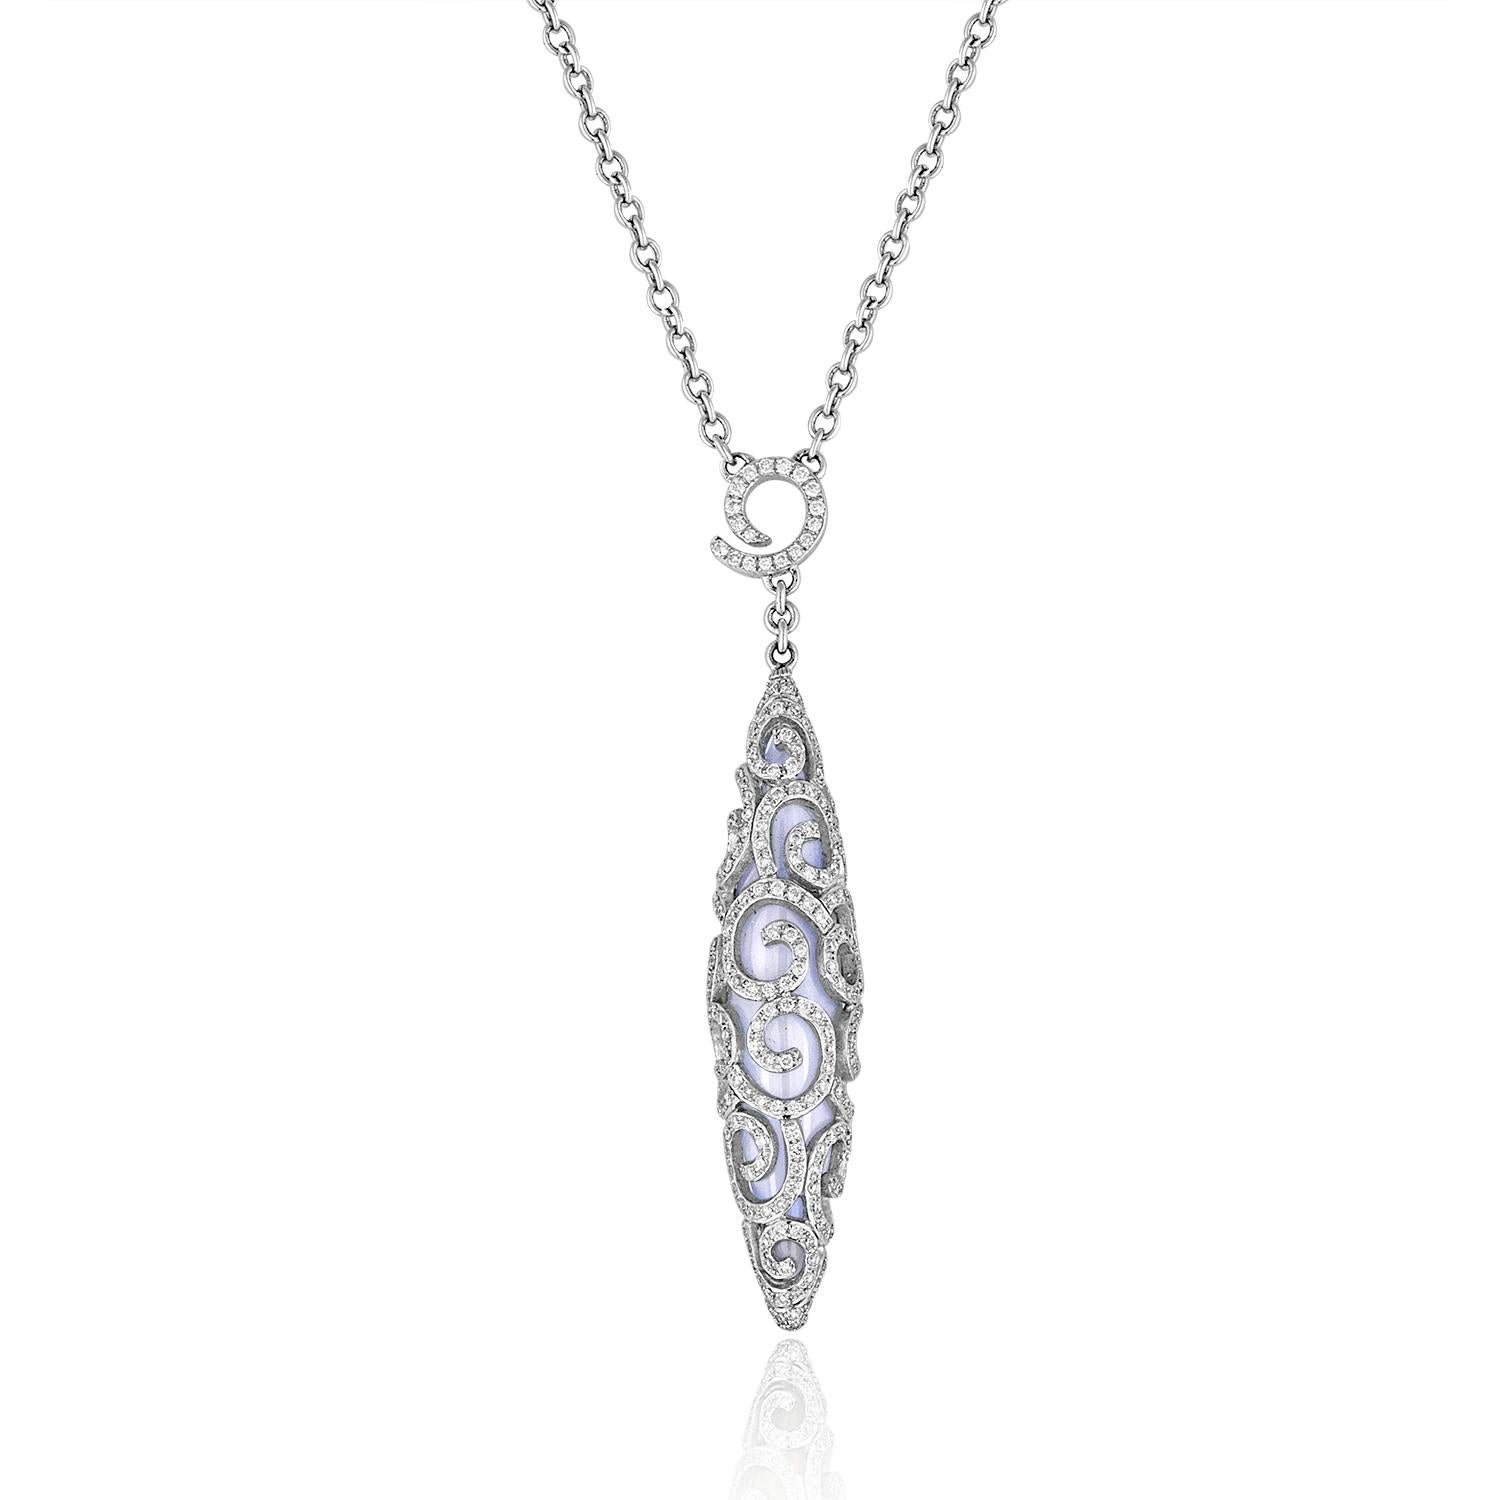 Pendant Necklace with Diamond scroll design
The necklace is 14K White Gold
1.03Ct of Diamonds
Inside is a Chalcedony Stone
The pendant measures 2